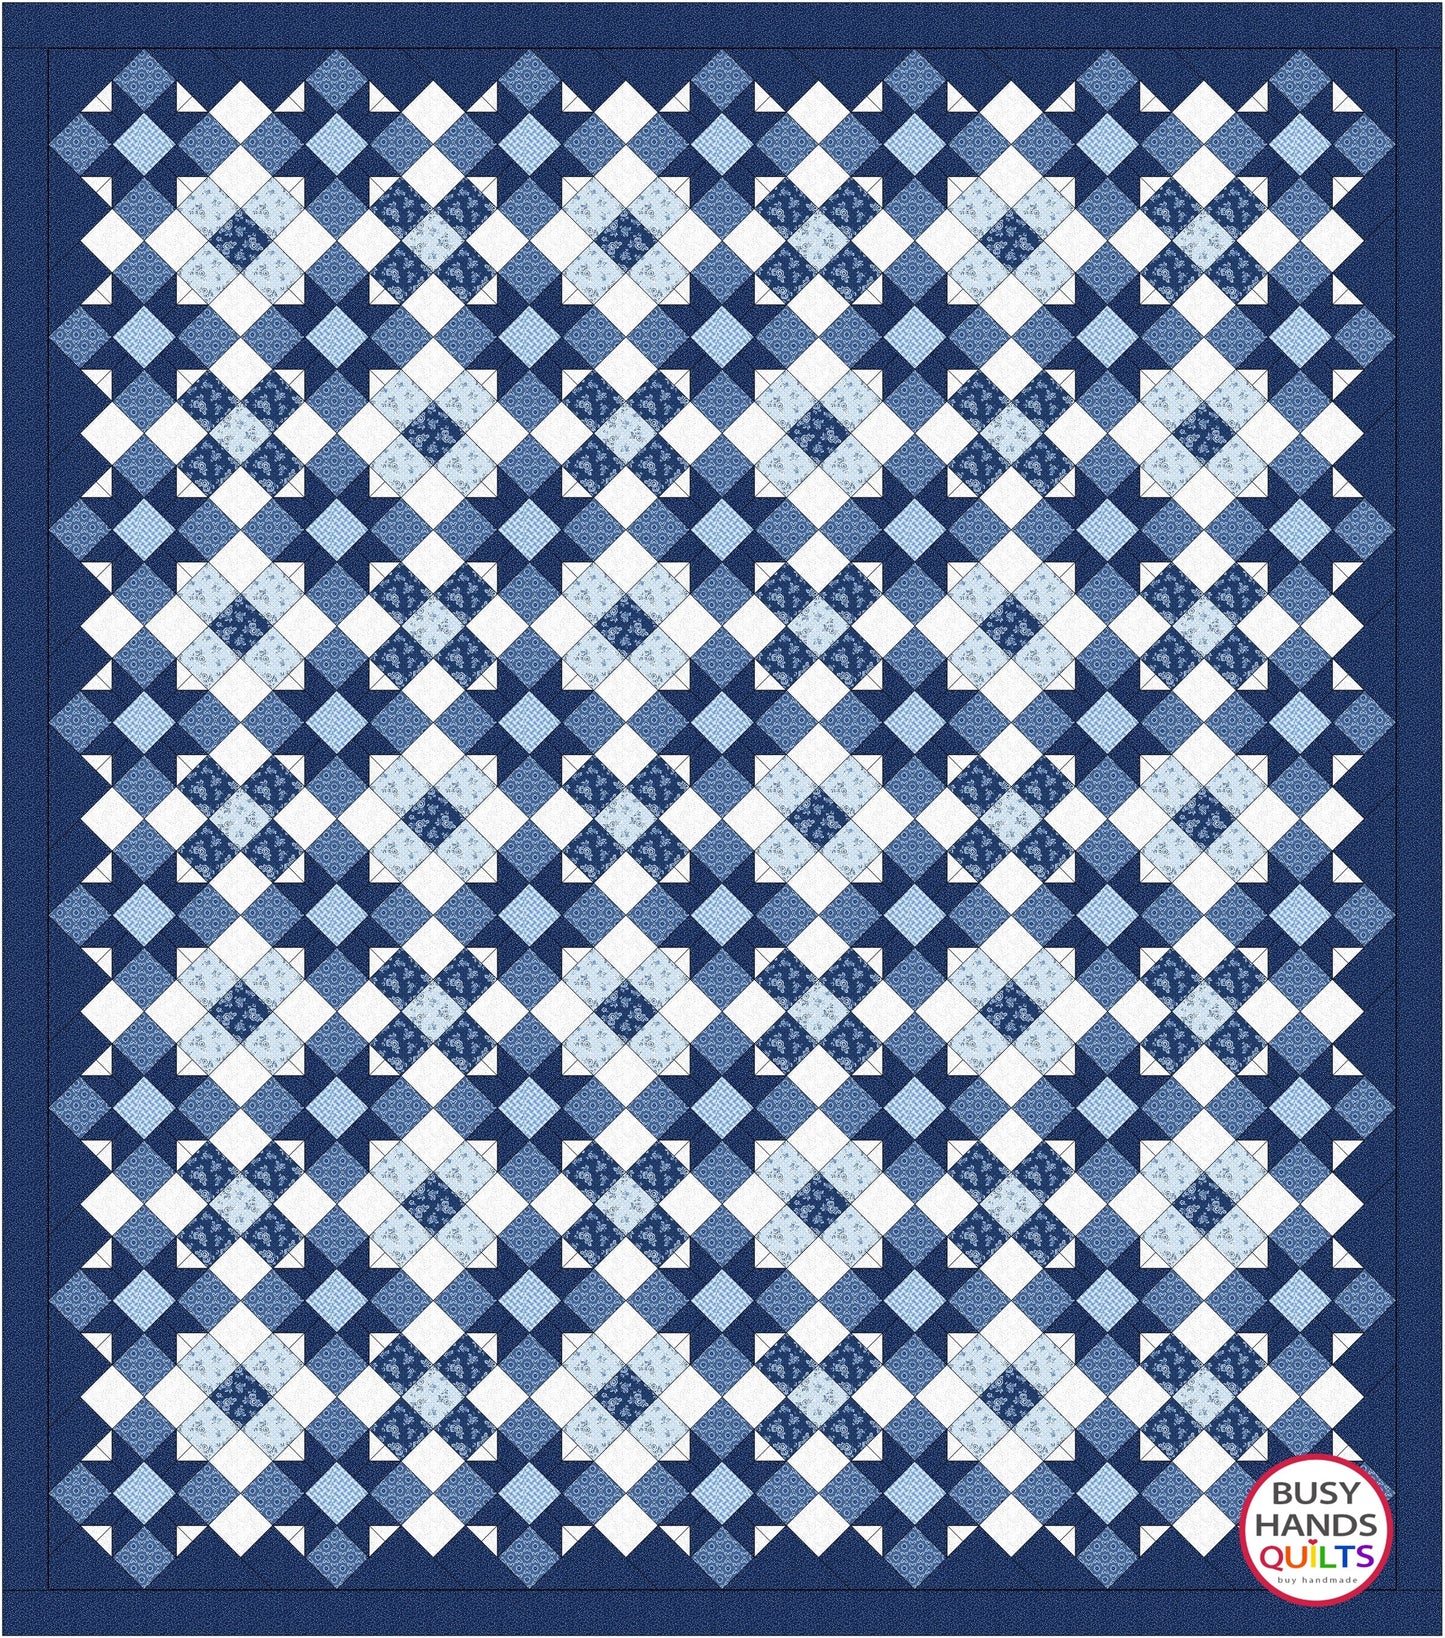 Calliope Quilt Pattern PRINTED Busy Hands Quilts {$price}